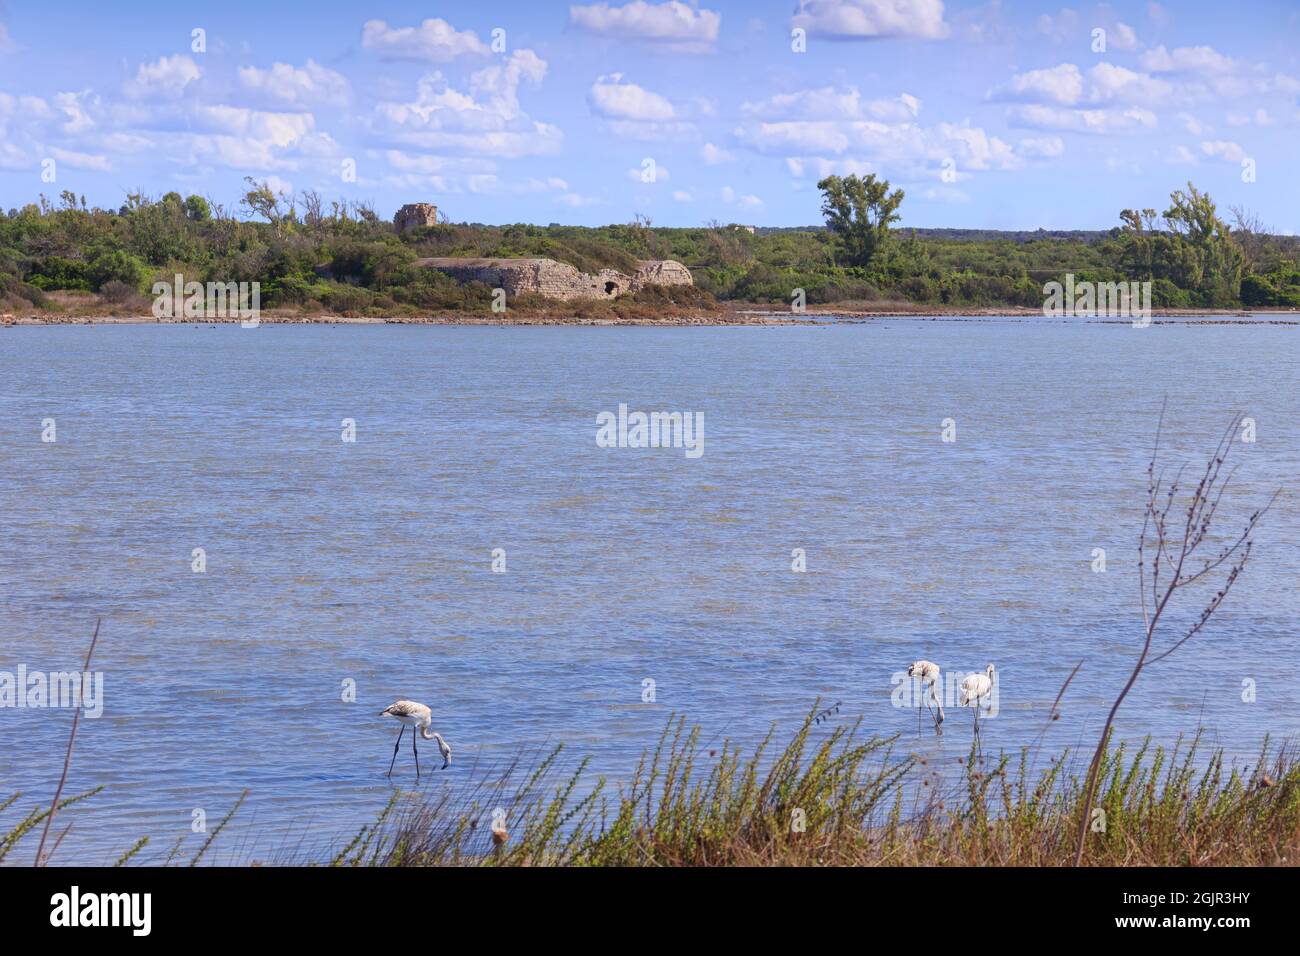 The Nature Reserve of Saline dei Monaci (Salt pans of Monks) is a distinctive area, located near Torre Colimena town on the coast of Puglia in Italy. Stock Photo